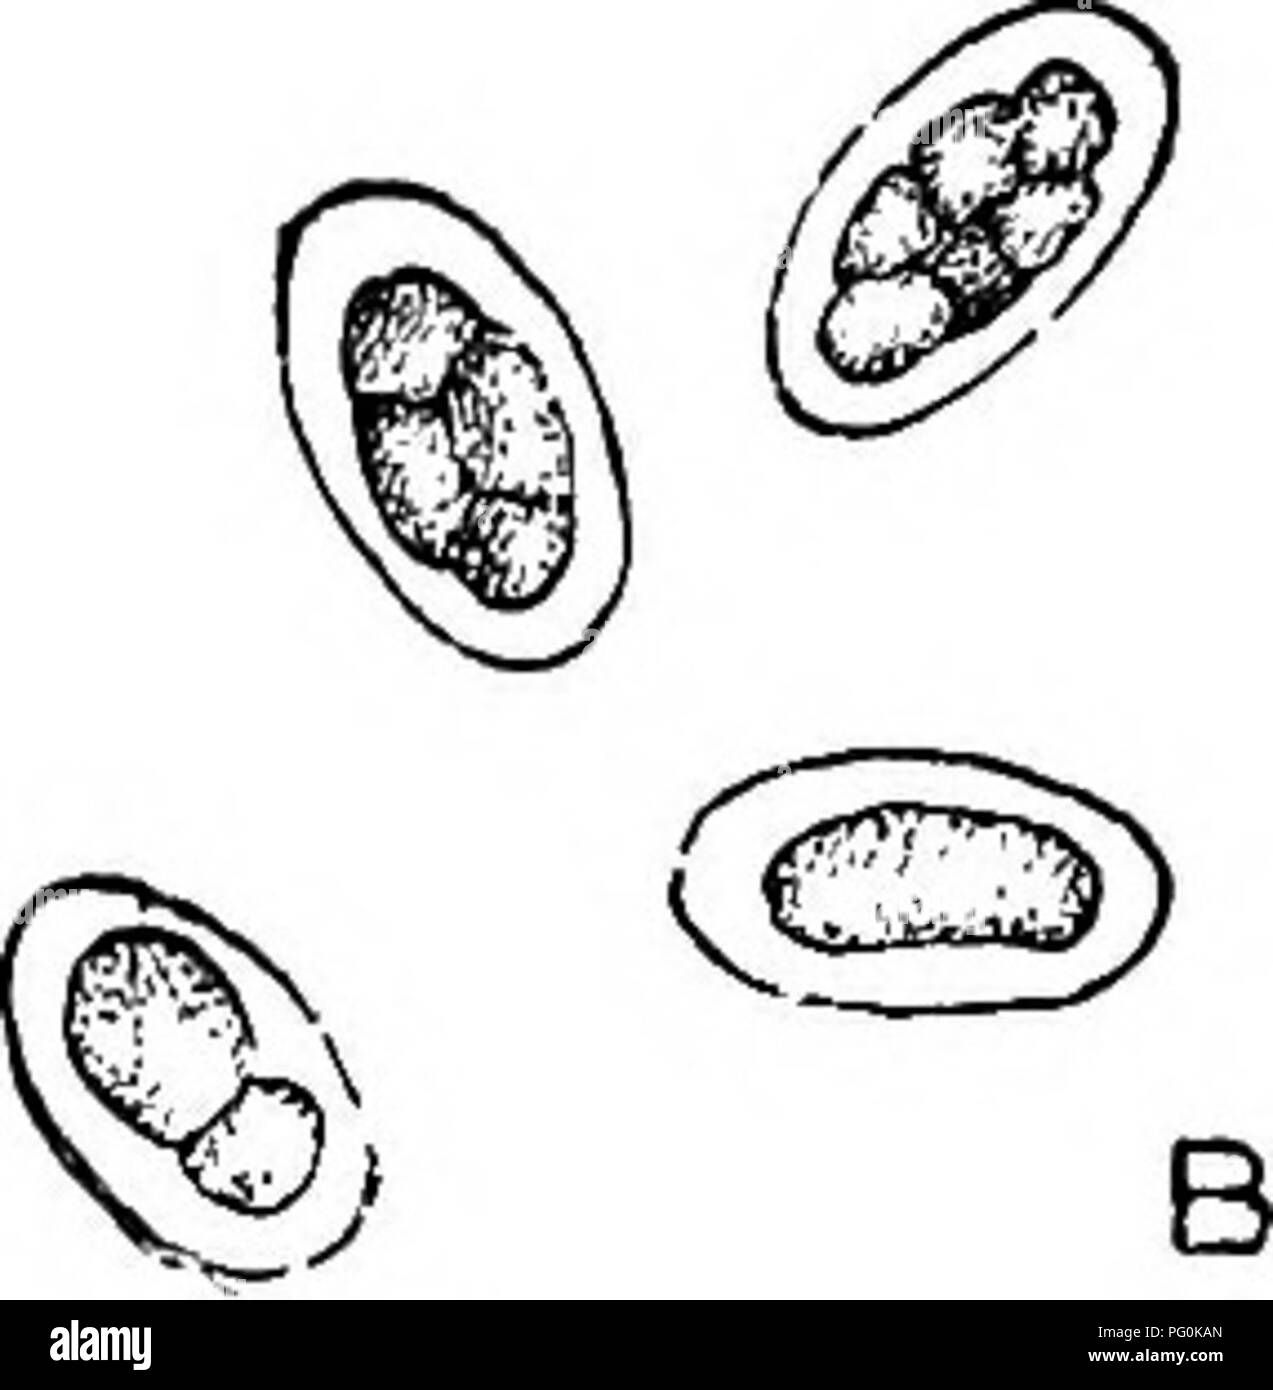 . Animal parasites and human disease. Medical parasitology; Insects as carriers of disease. Fig. 104. Eggs of hookworms in early stages of segmentation, — four-segmented type most common in faeces; A, Necator americanus; B, Ancylostoma duodenale. the host, usually in a continuous stream, but occasionally with intermissions, to be passed with the faeces. The thin-shelled eggs, which are about 60 ^ by 35 ai {-^is by 7^^ of an inch) in size, and slightly larger in the American species, undergo the first stages of development while still in the intestinal canal, and by the time they are voided wit Stock Photo